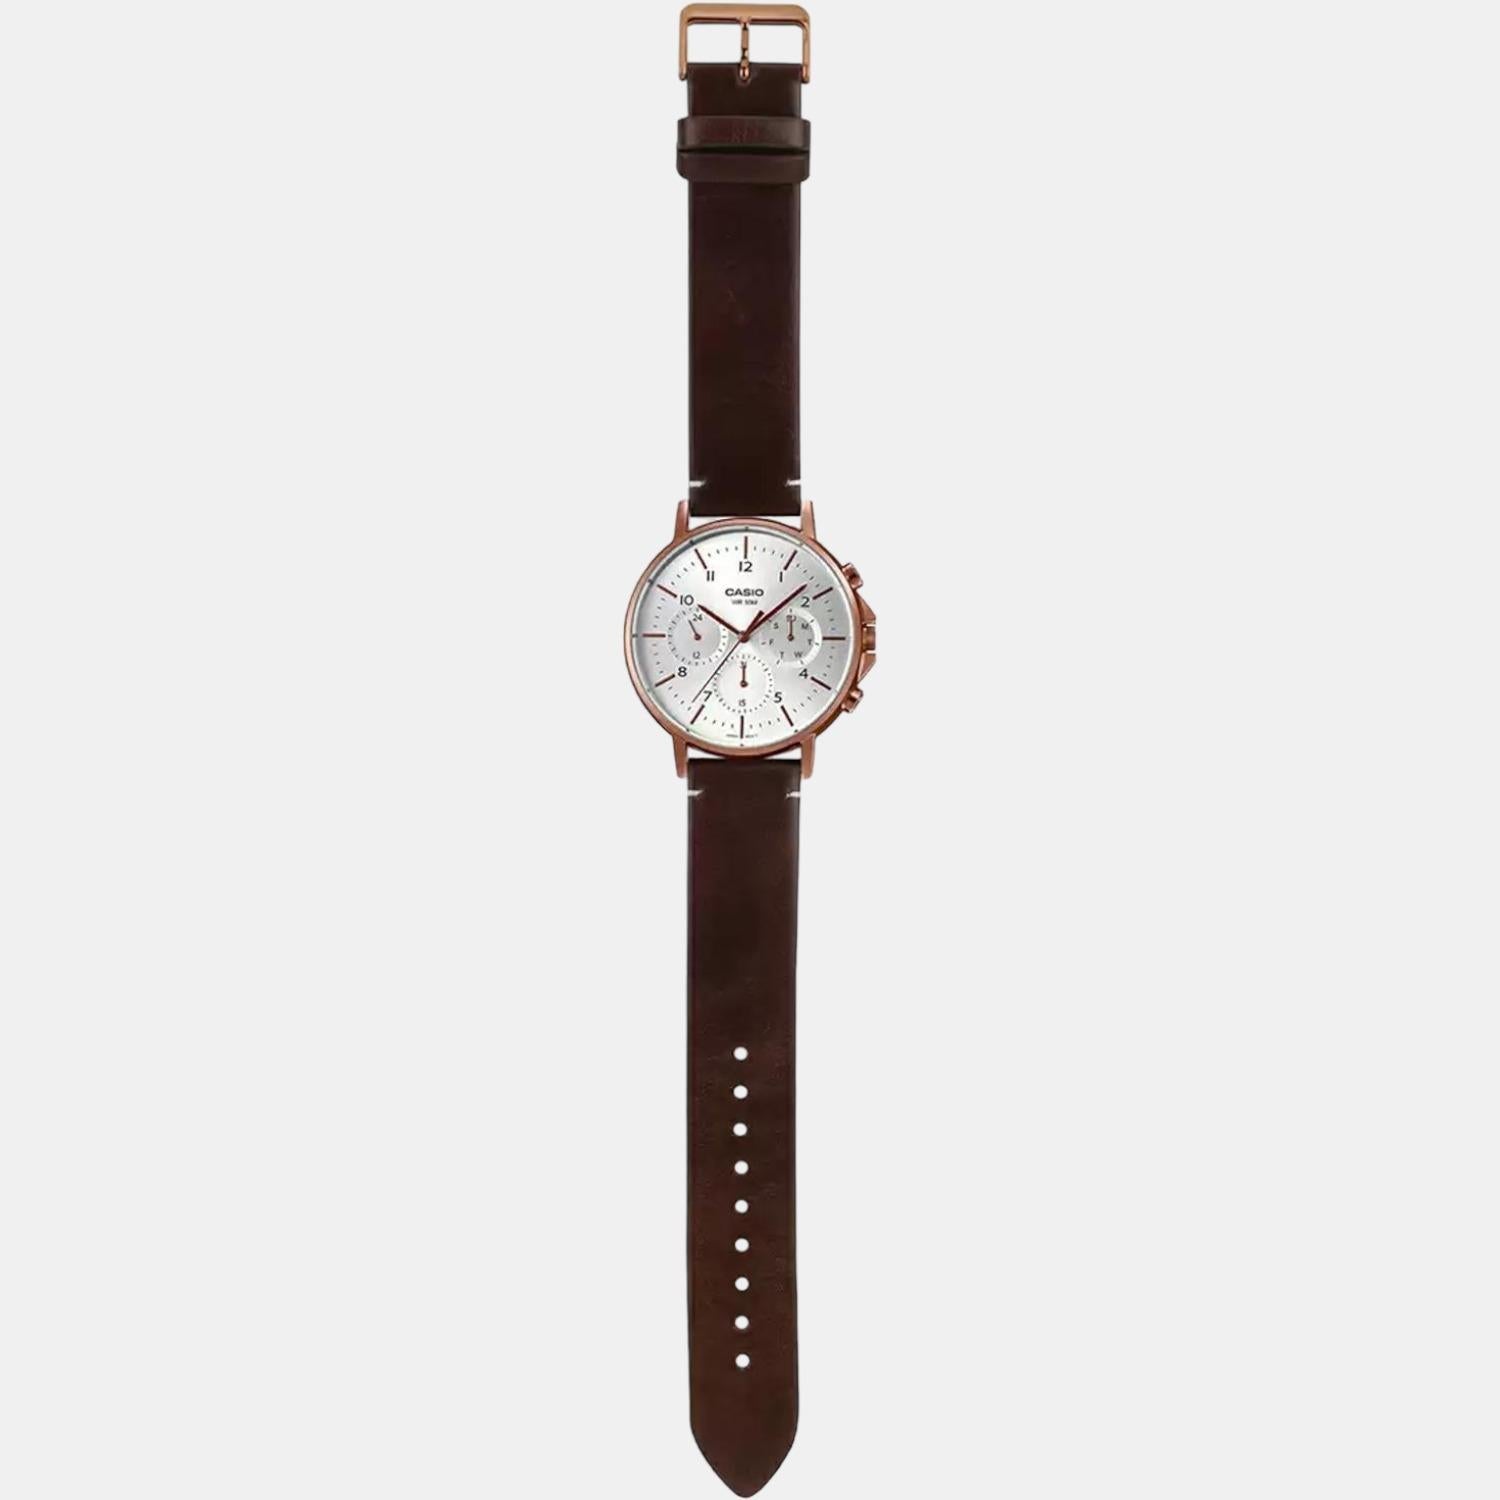 casio-stainless-steel-rose-gold-analog-men-watch-a1850